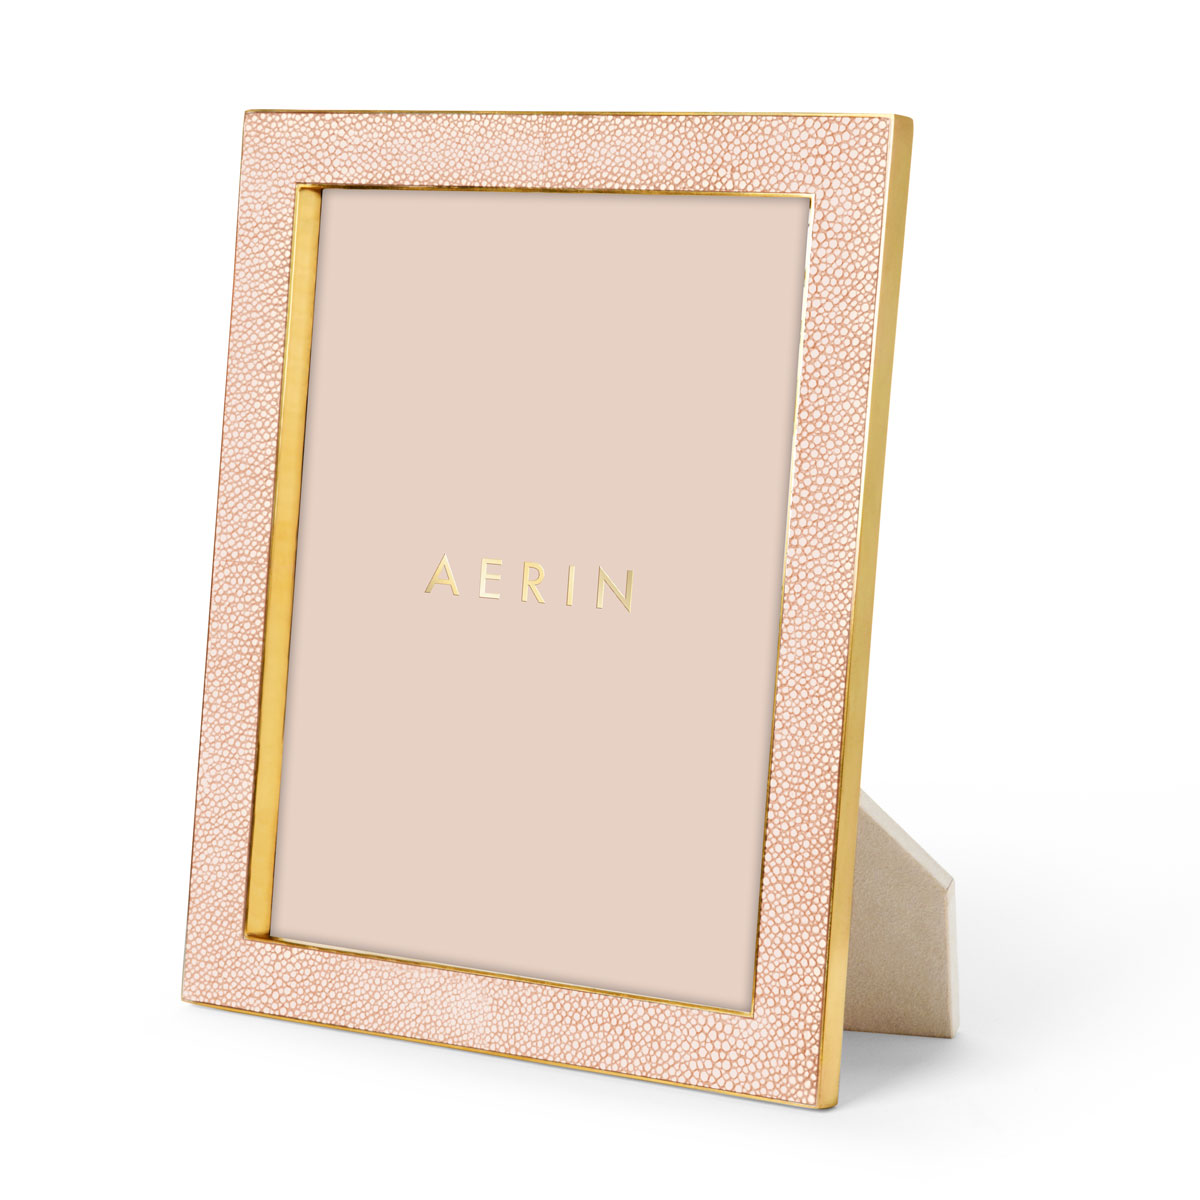 Aerin Classic Shagreen Blush 8x10" Picture Frame